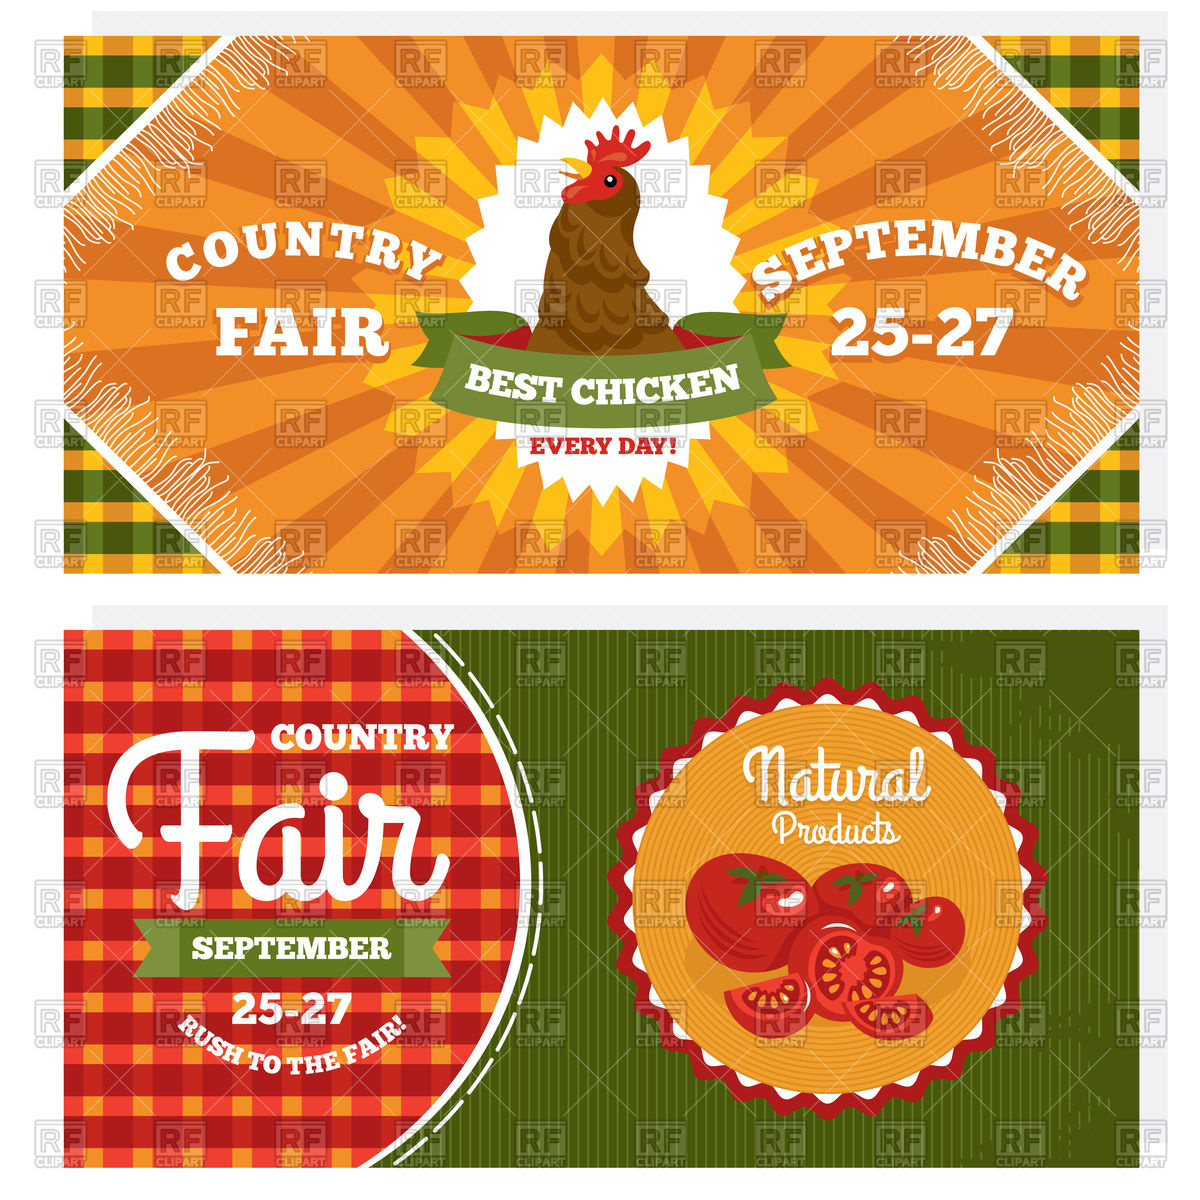 Country Fair Vintage Invitation Cards Design 93695 Download Royalty